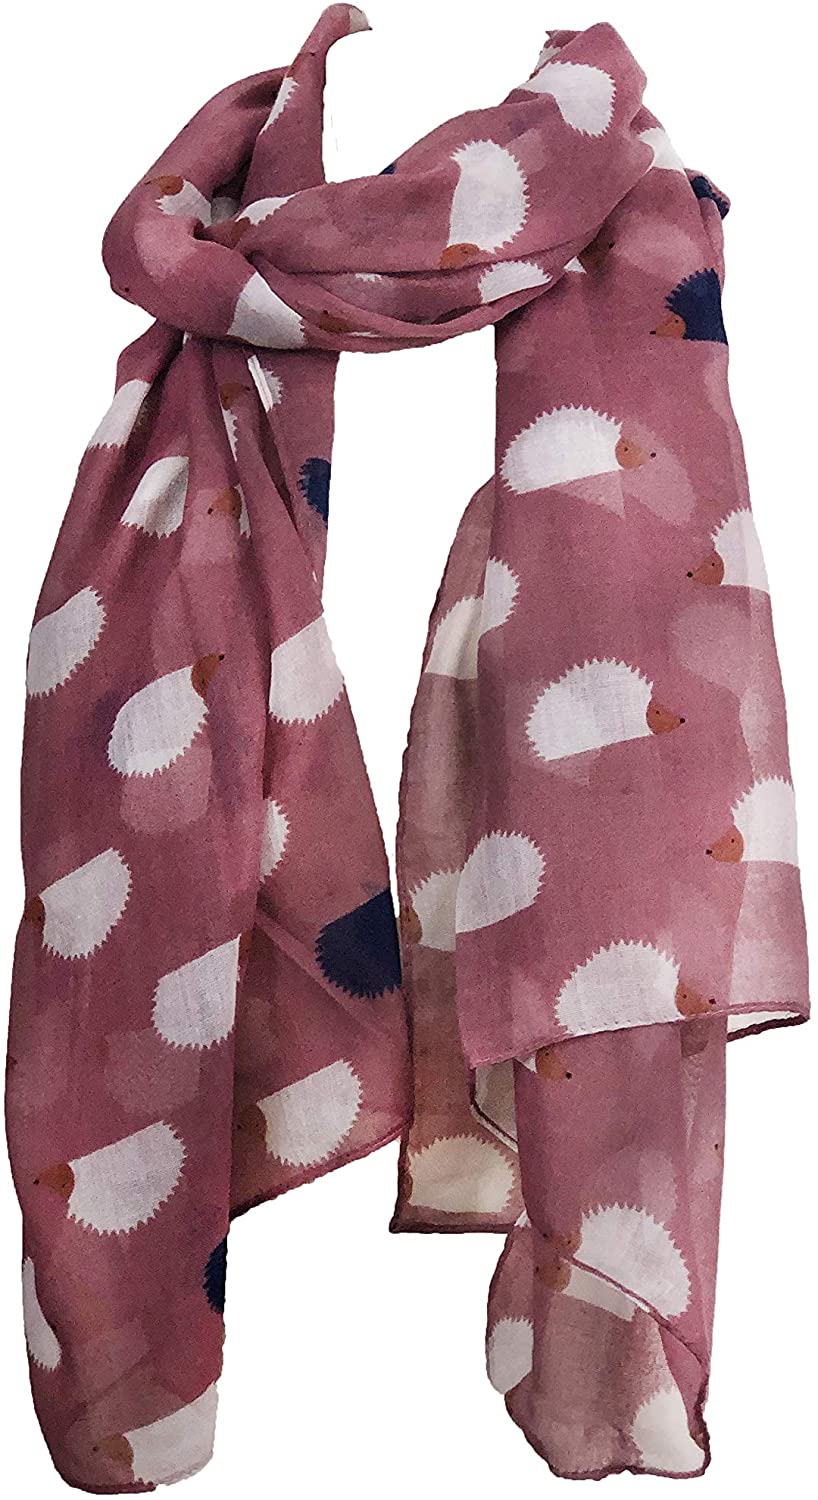 Pamper Yourself Now Pink with White and Blue Hedgehog Scarf, Great Present/Gifts.